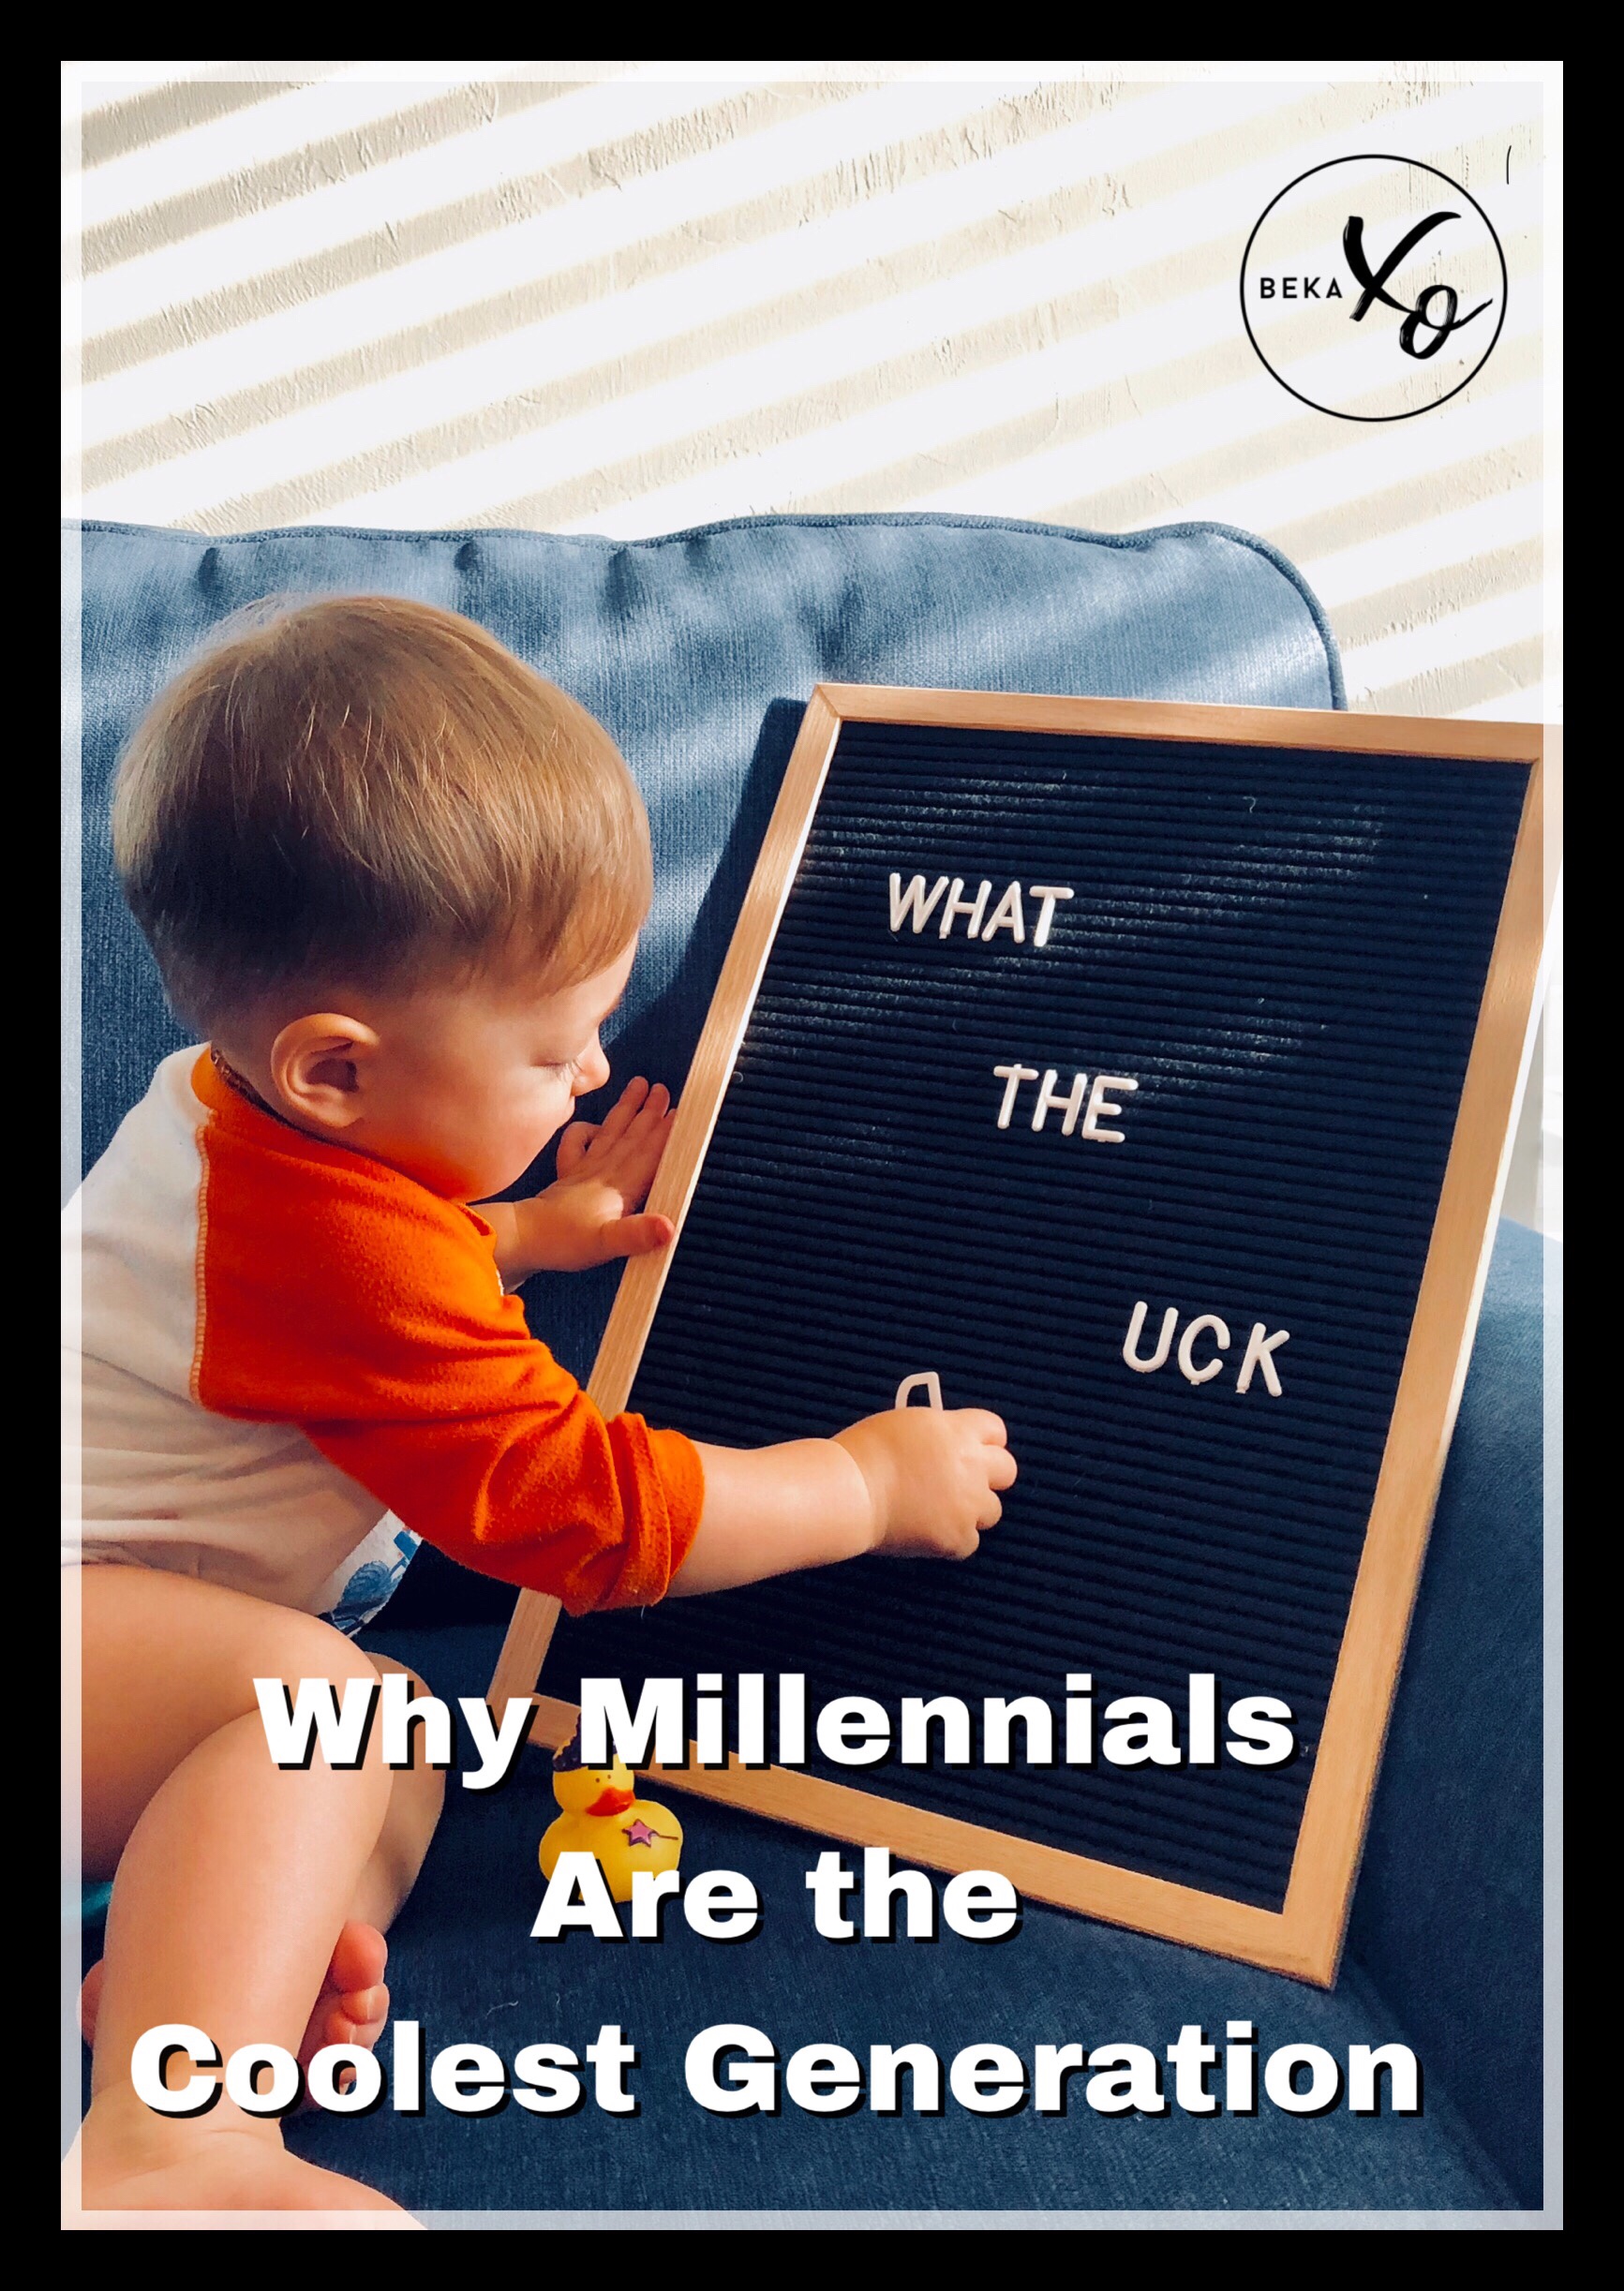 Why Millennials are the coolest generation ~ Beka XO